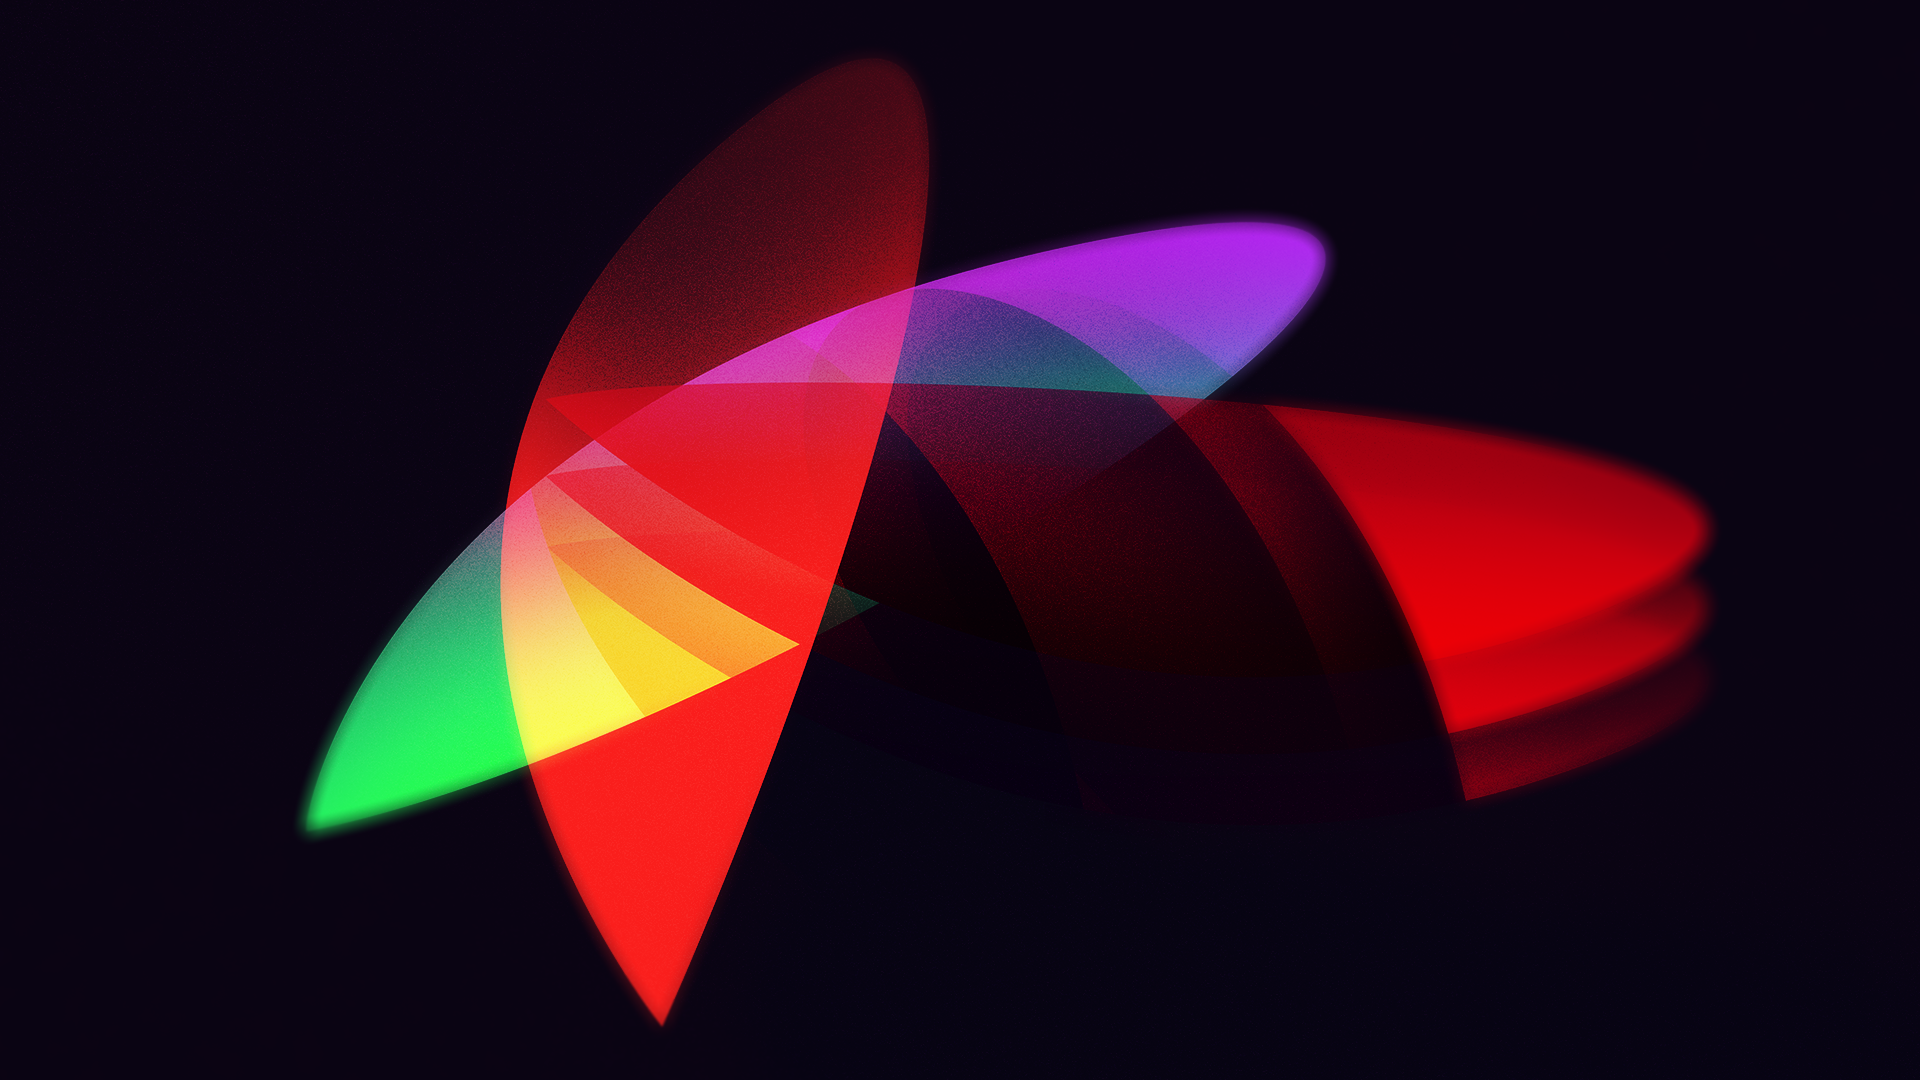 General 1920x1080 digital art colorful shapes simple background